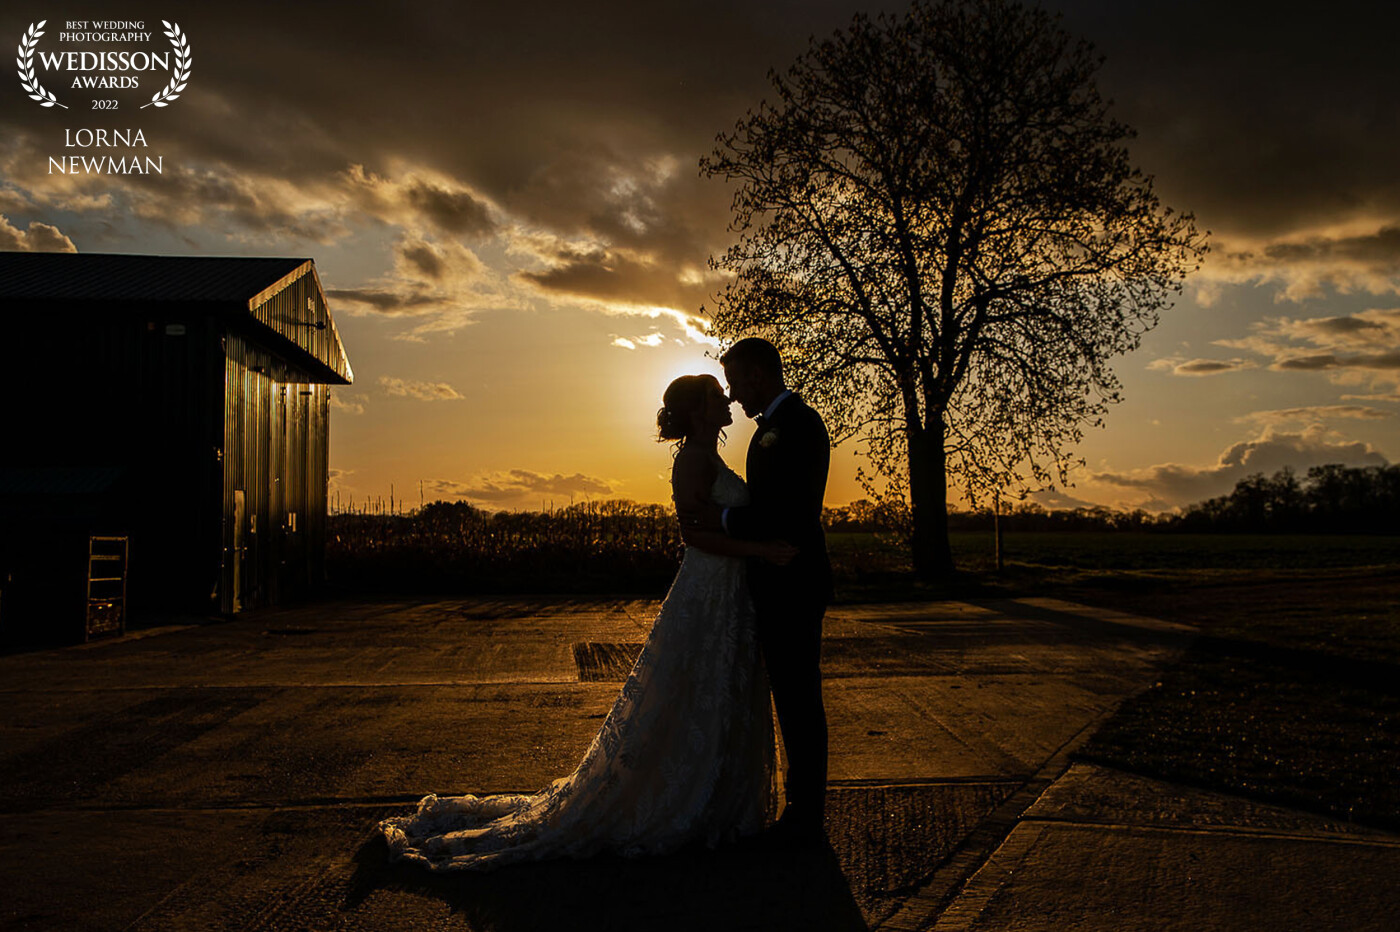 Katy & Andy had all the seasons on their wedding day, snow, wind, rain and sun. All that made for the most perfect sunset! I love it when you get a stunning sunset to finish off an amazing wedding day for a lovely couple.<br />
<br />
Bassmead Manor Barn - Cambridgeshire